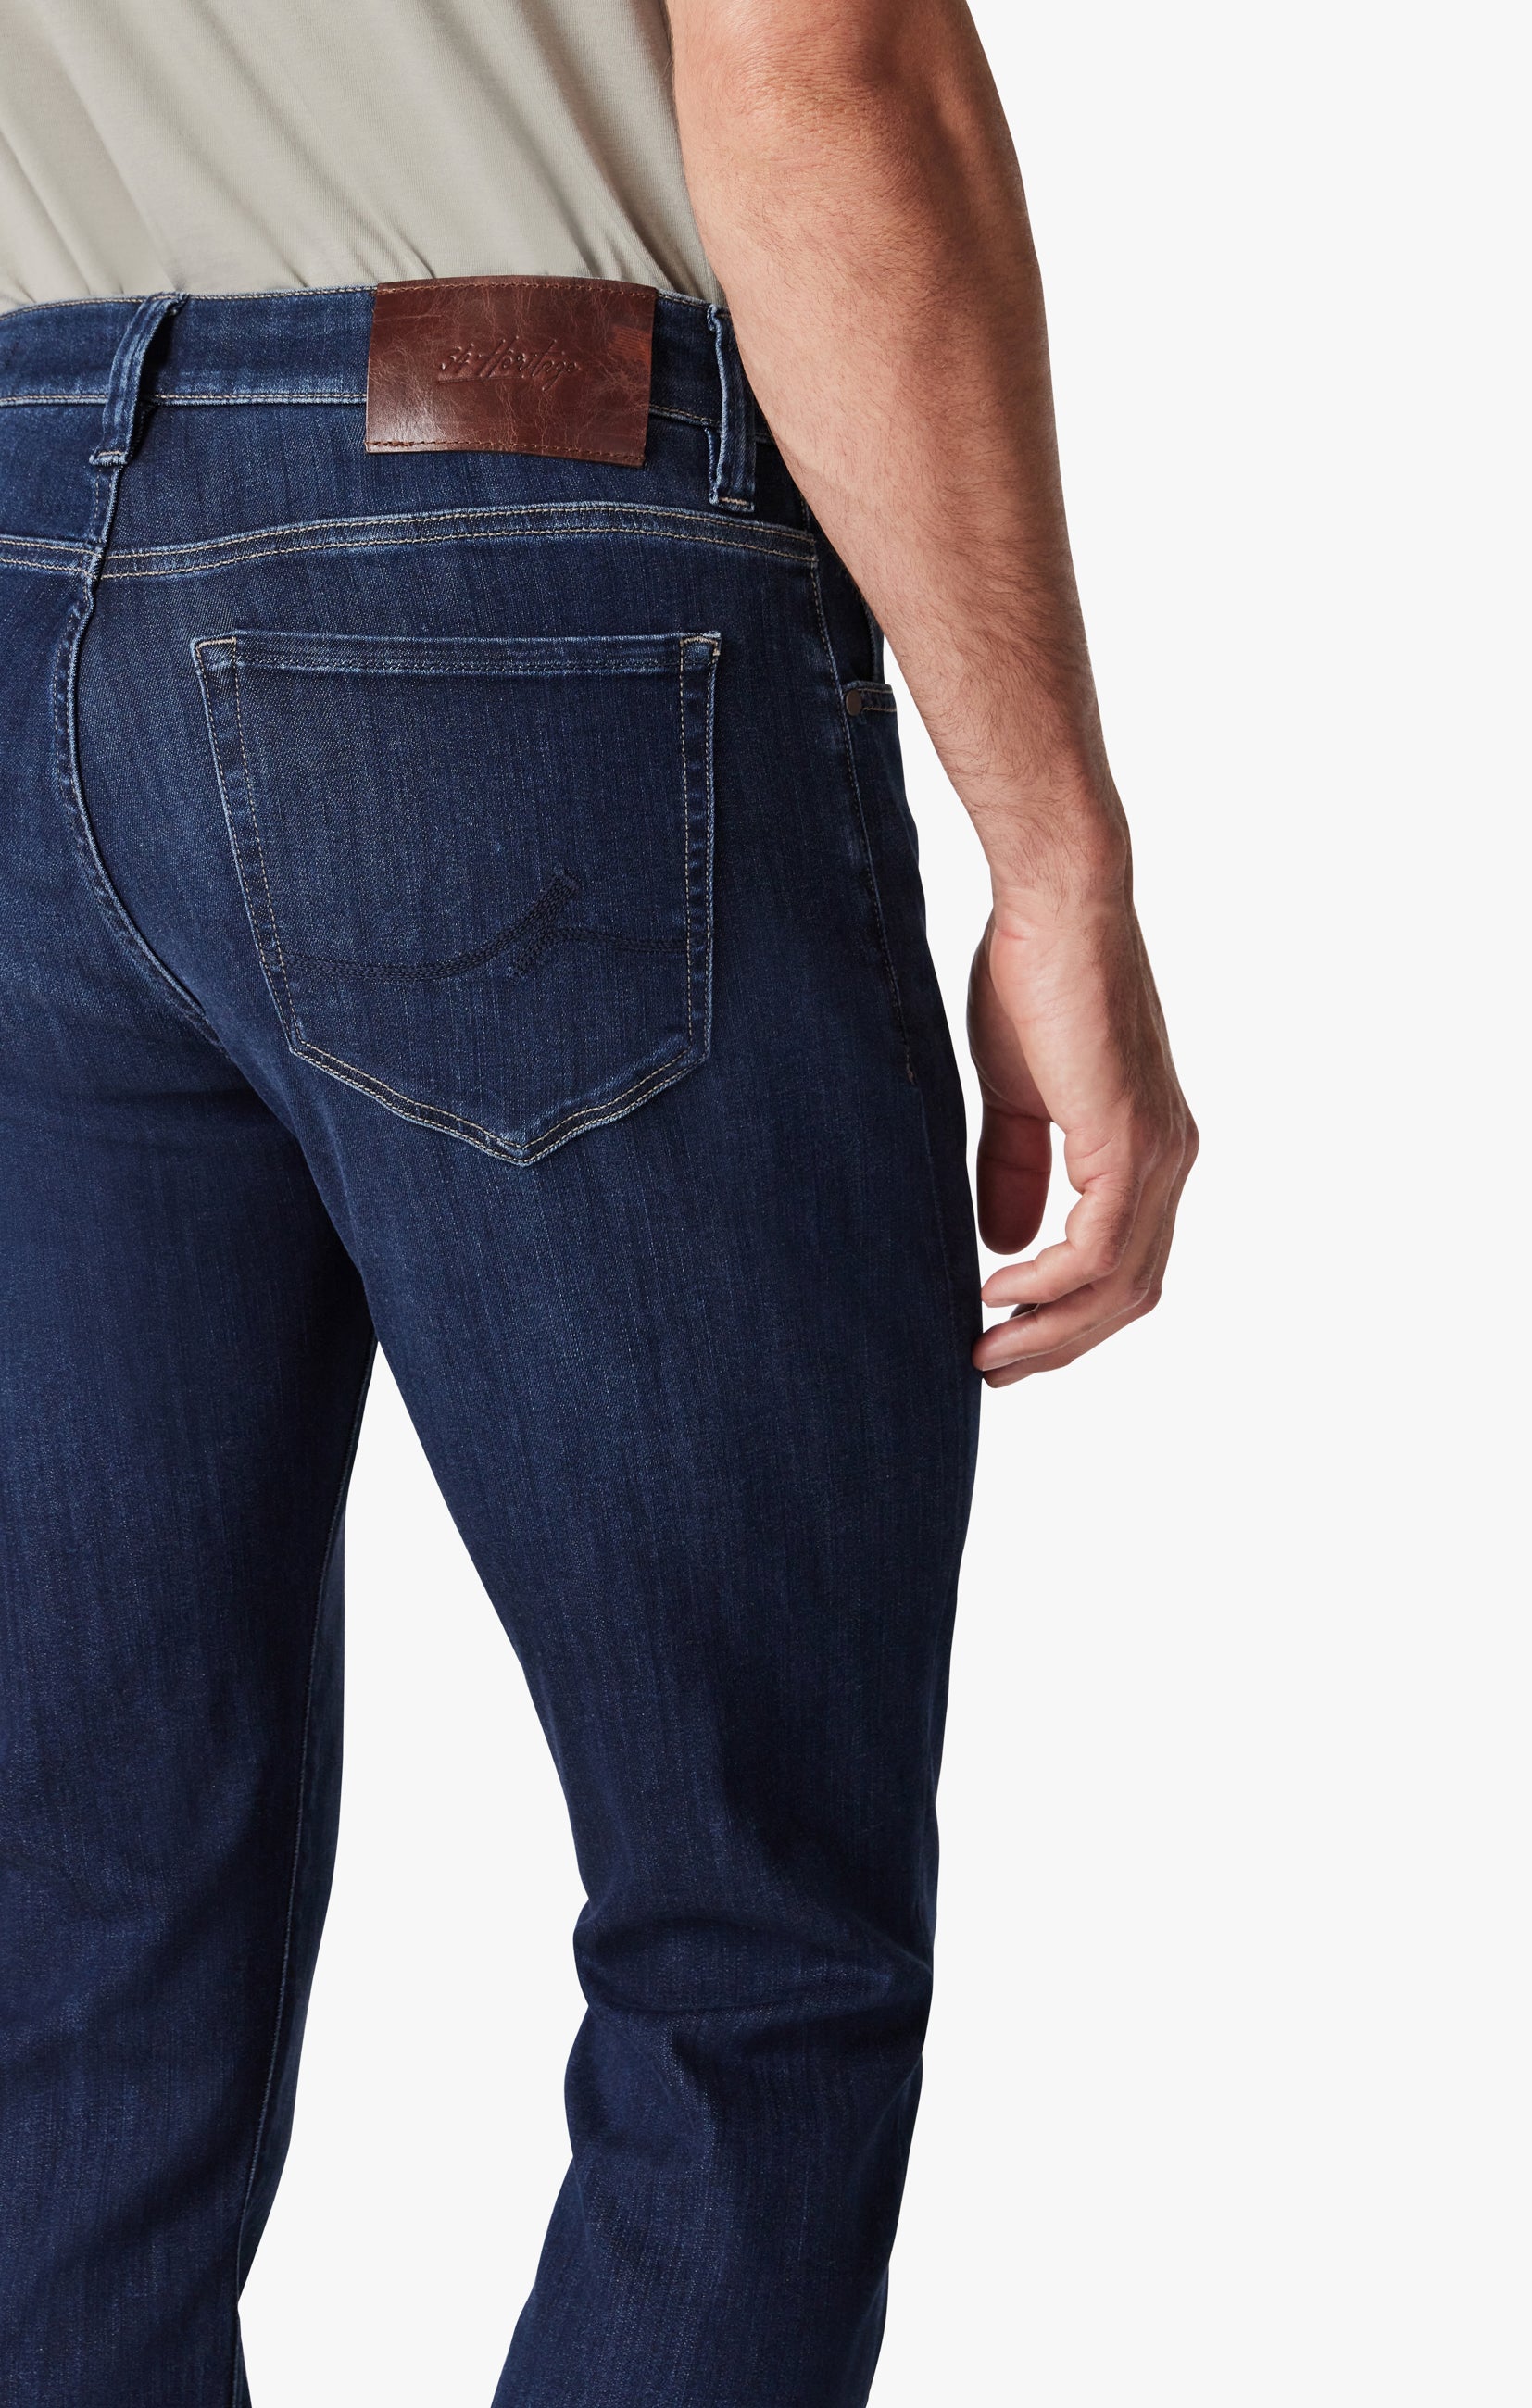 Champ Athletic Fit Jeans in Dark Brushed Refined Image 6